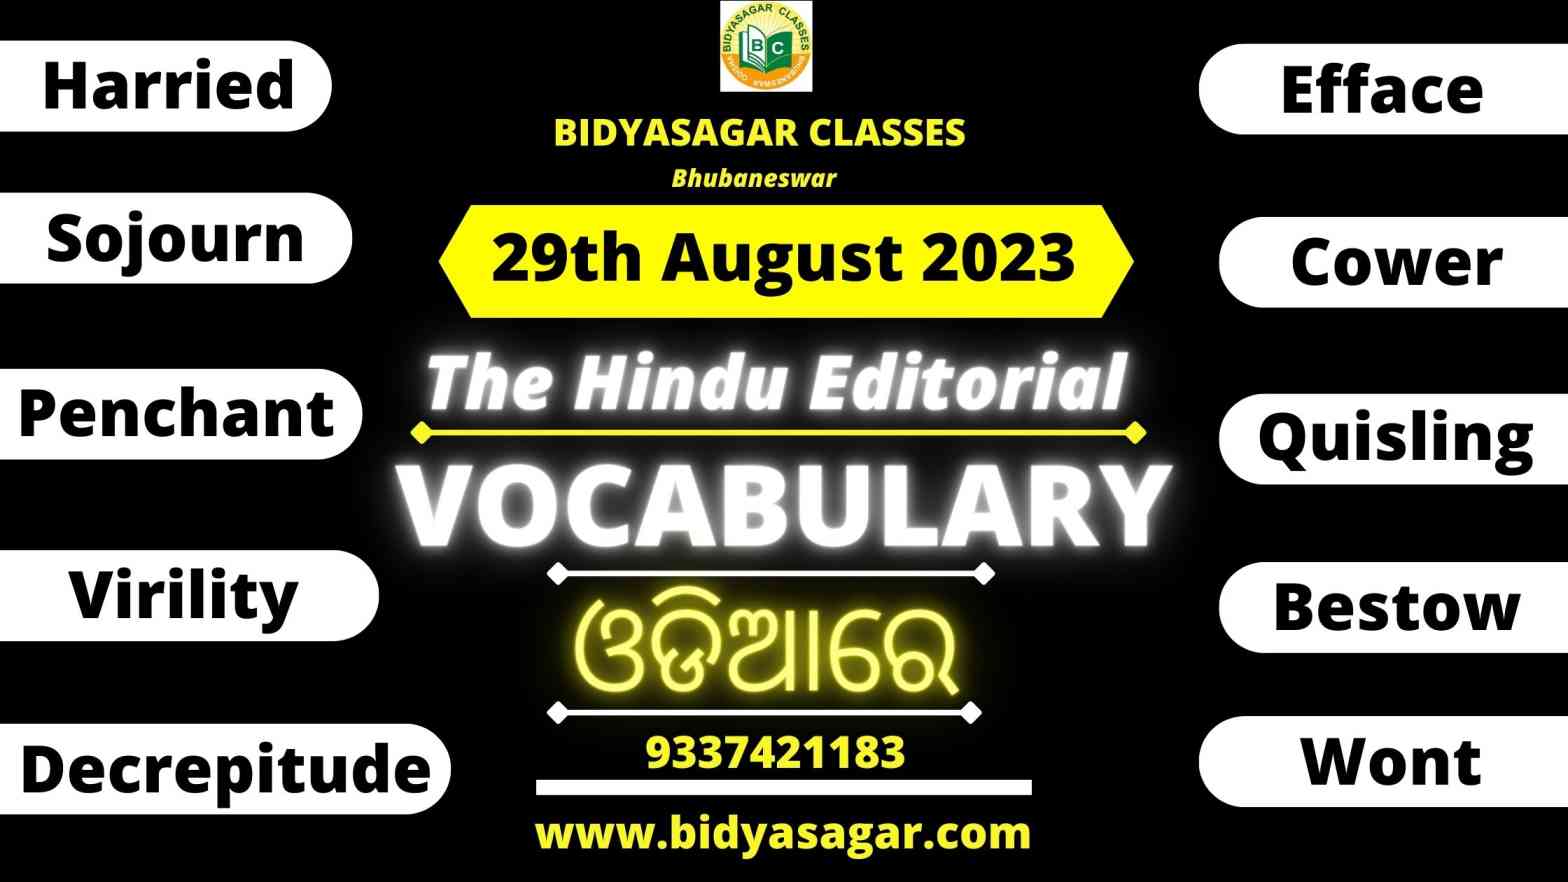 The Hindu Editorial Vocabulary of 29th August 2023